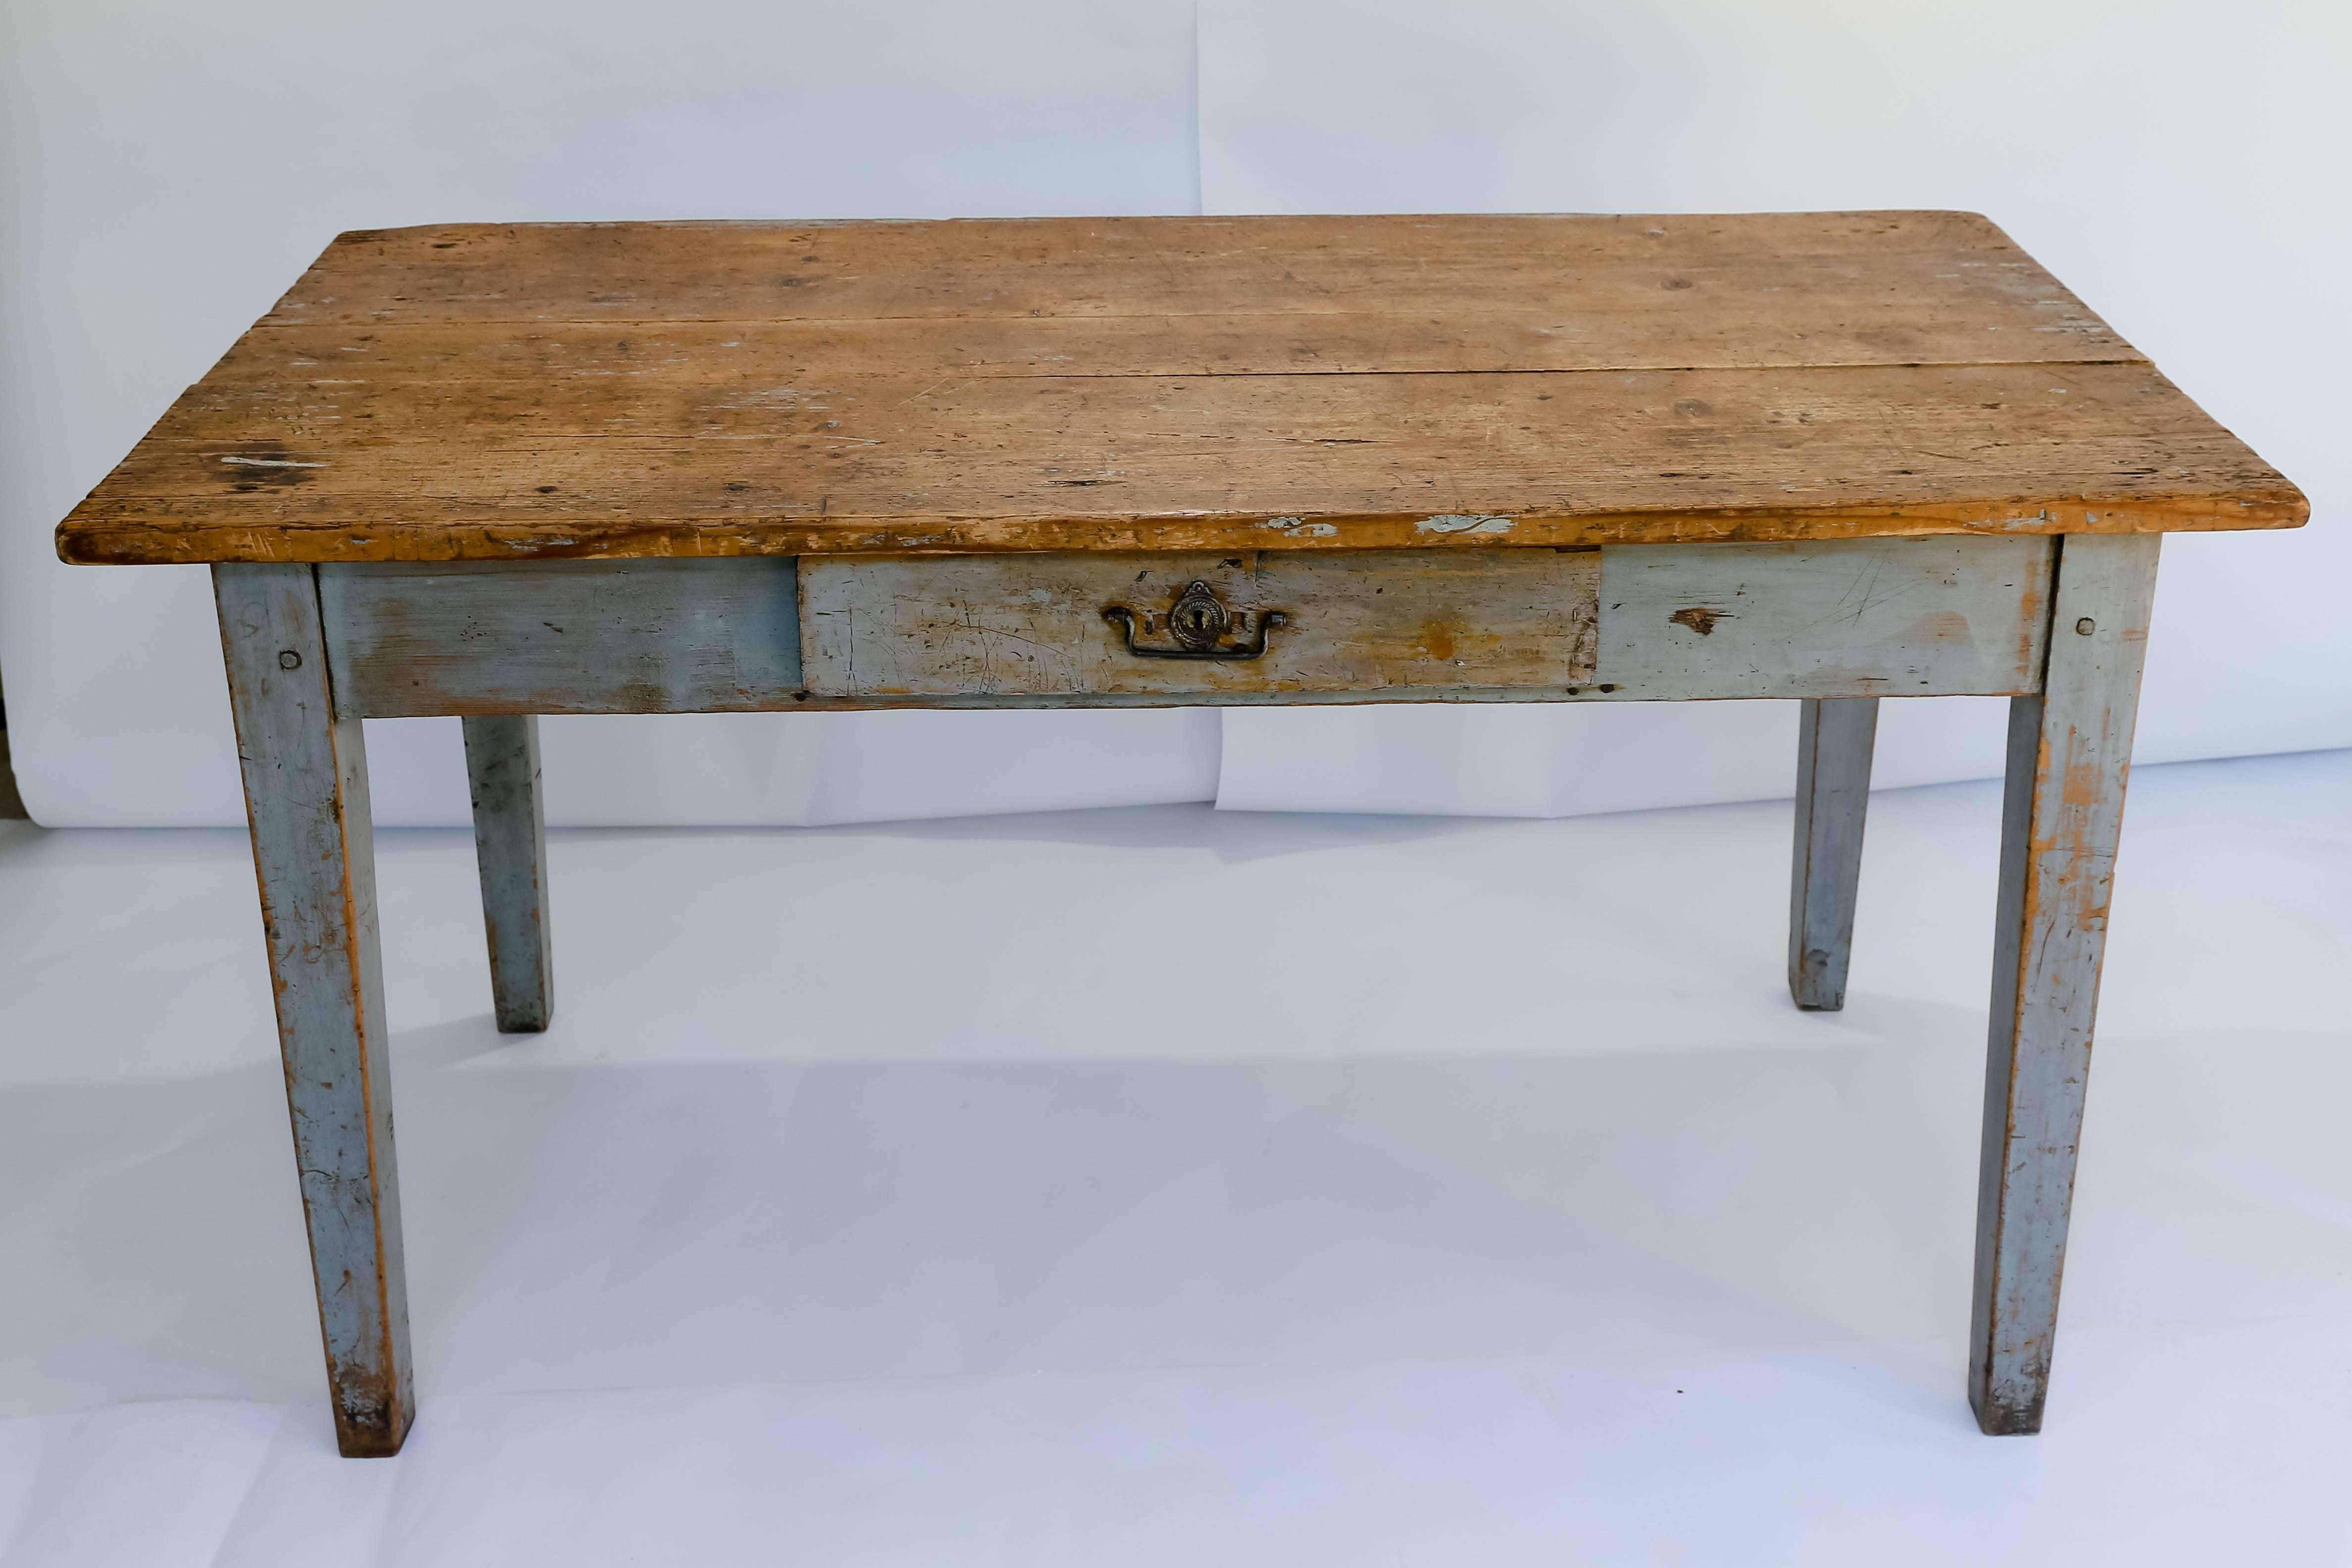 Rustic french farm table or writing desk. Made of beautifully painted wood with an excellent patina. One center drawer with a divided interior and decorative key hole. 